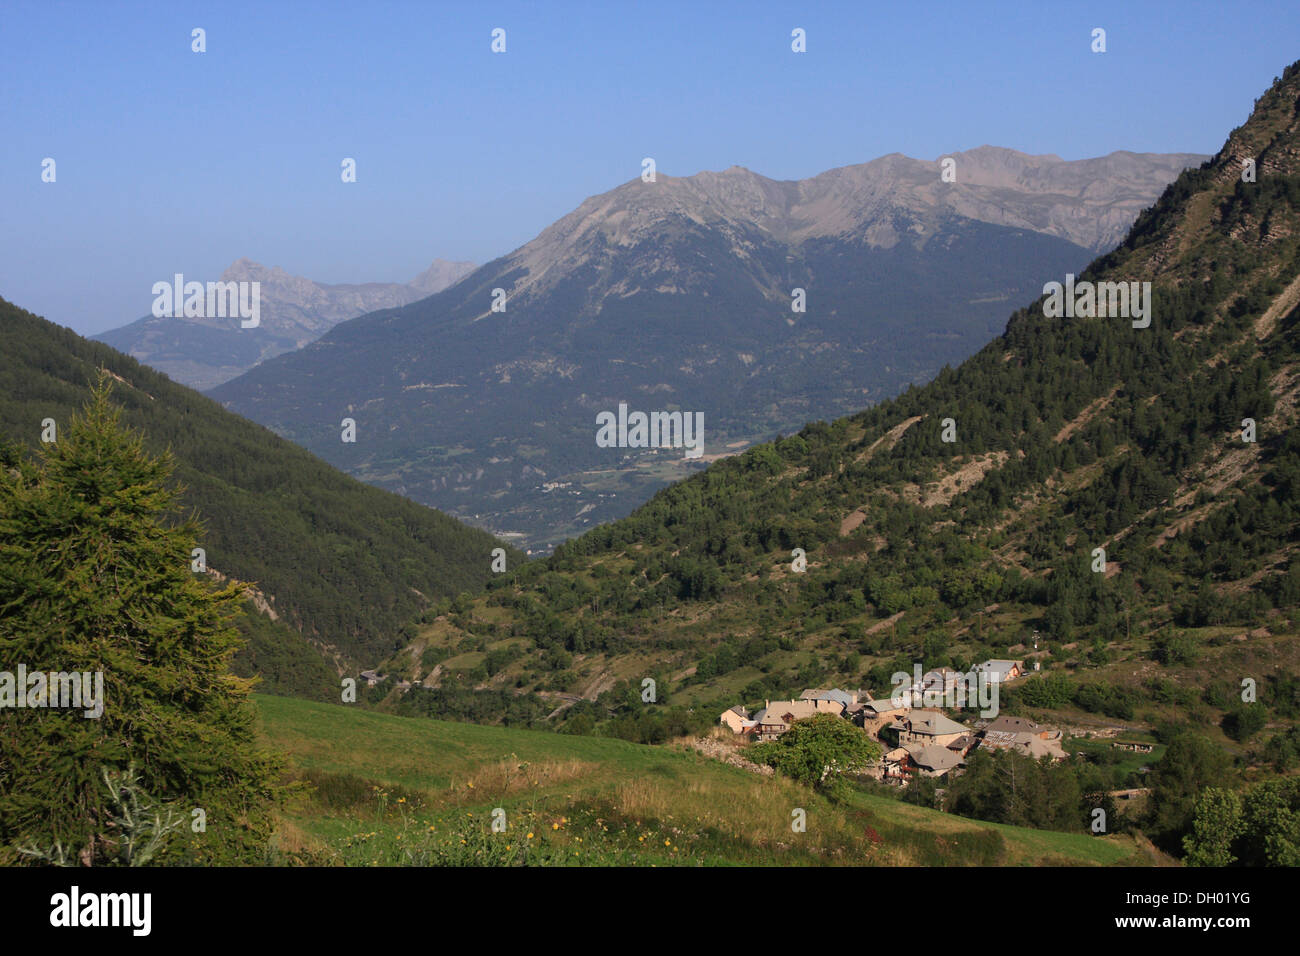 View of the Durance valley as seen from Crévoux, Crévoux near Embrun, Hautes-Alpes department, Western Alps, France, Europe Stock Photo